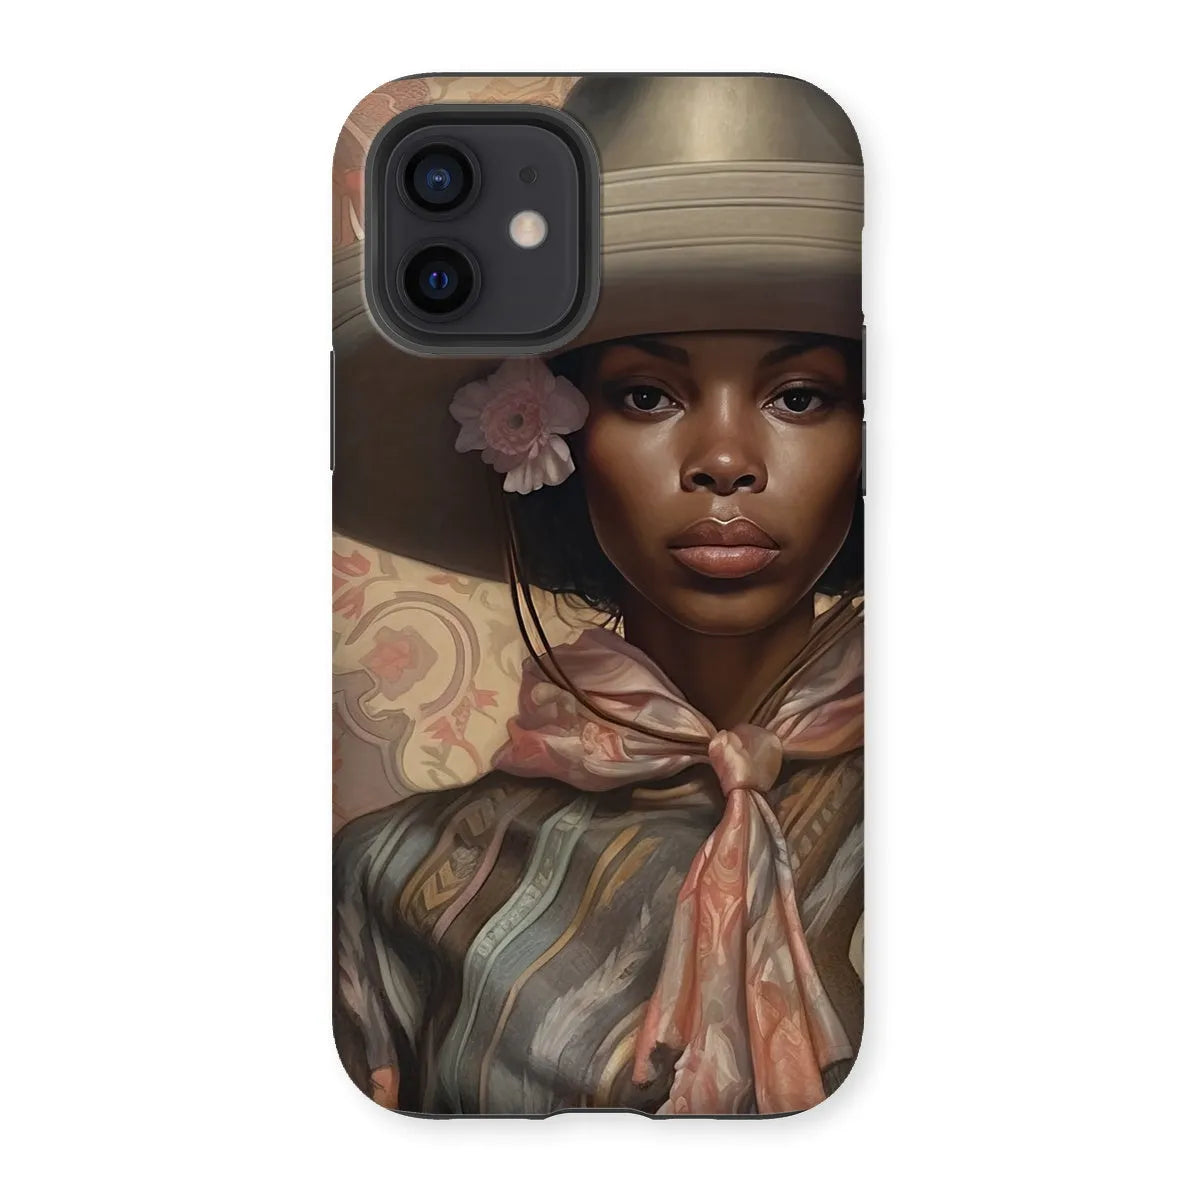 Sadie The Lesbian Cowgirl - Sapphic Art Phone Case - Iphone 12 / Matte - Mobile Phone Cases - Aesthetic Art